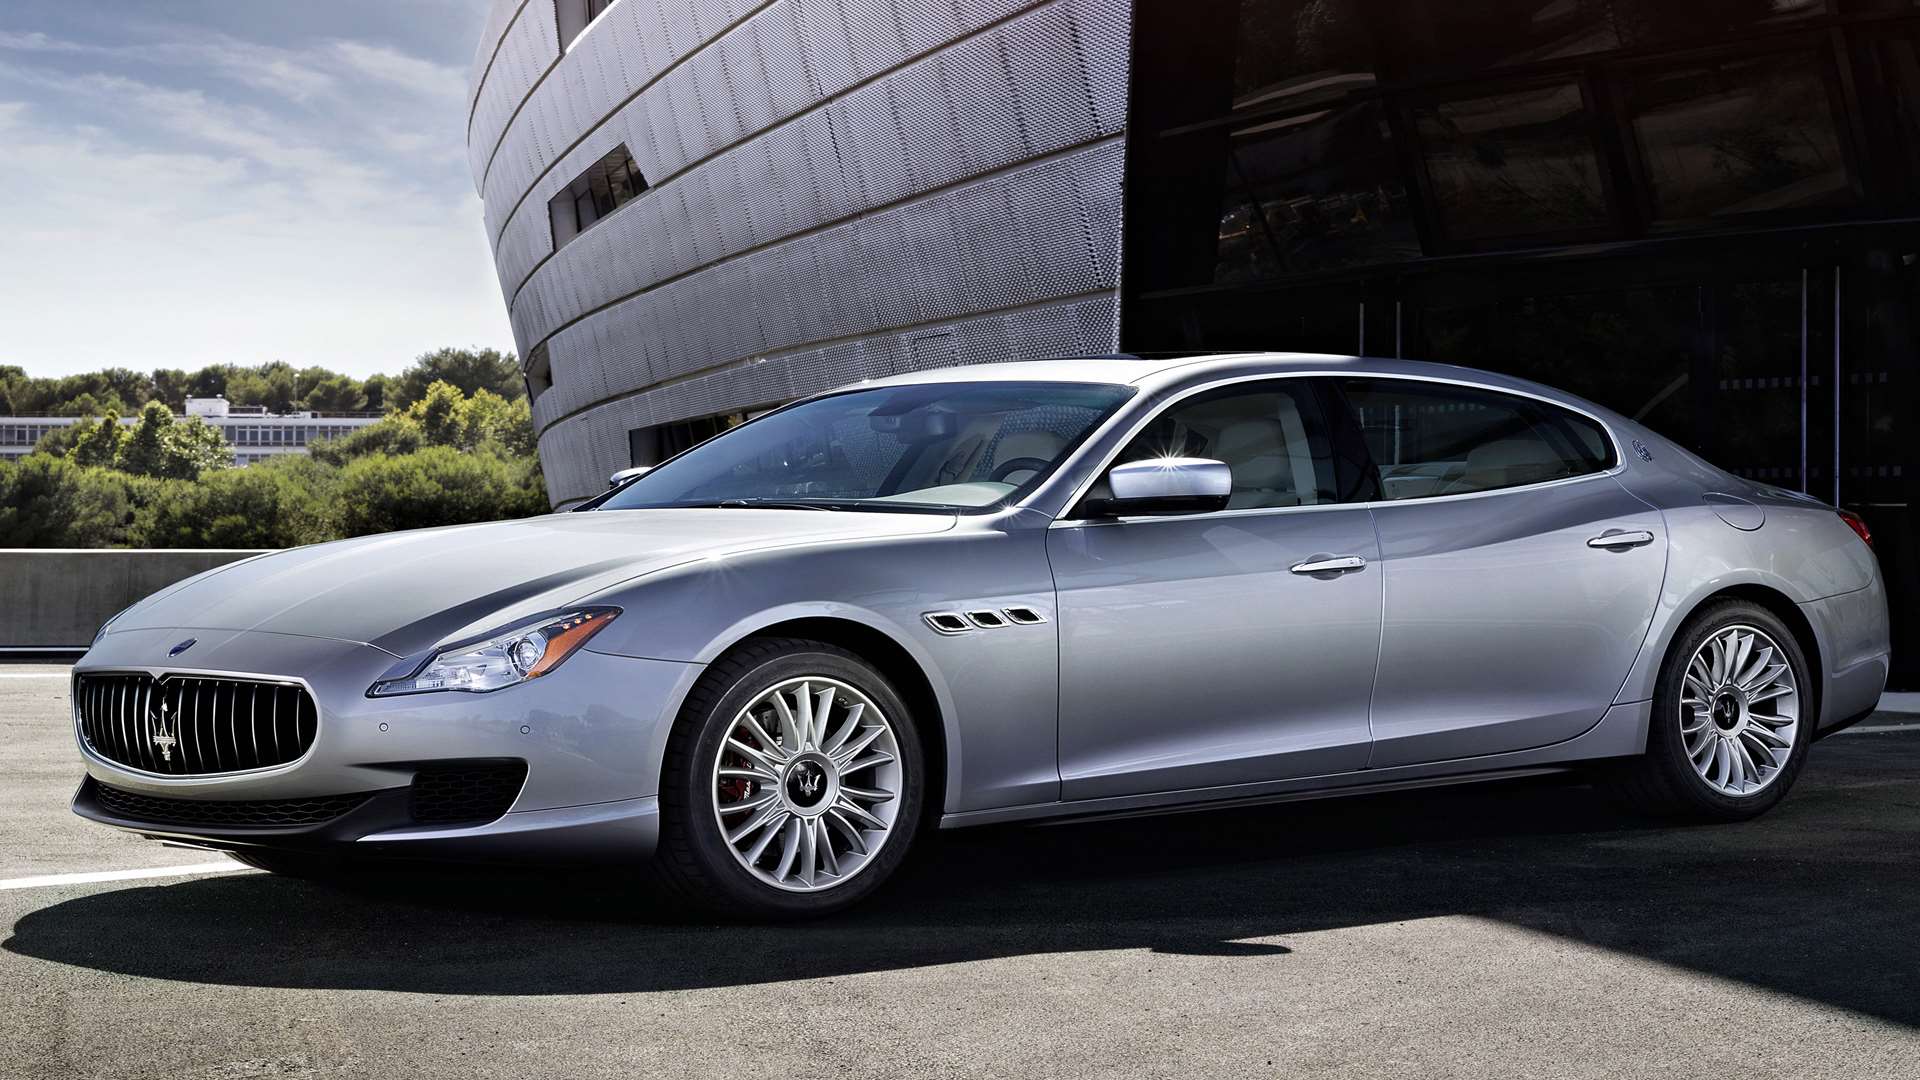 The Quattroporte is aggressively styled, particularly at the front